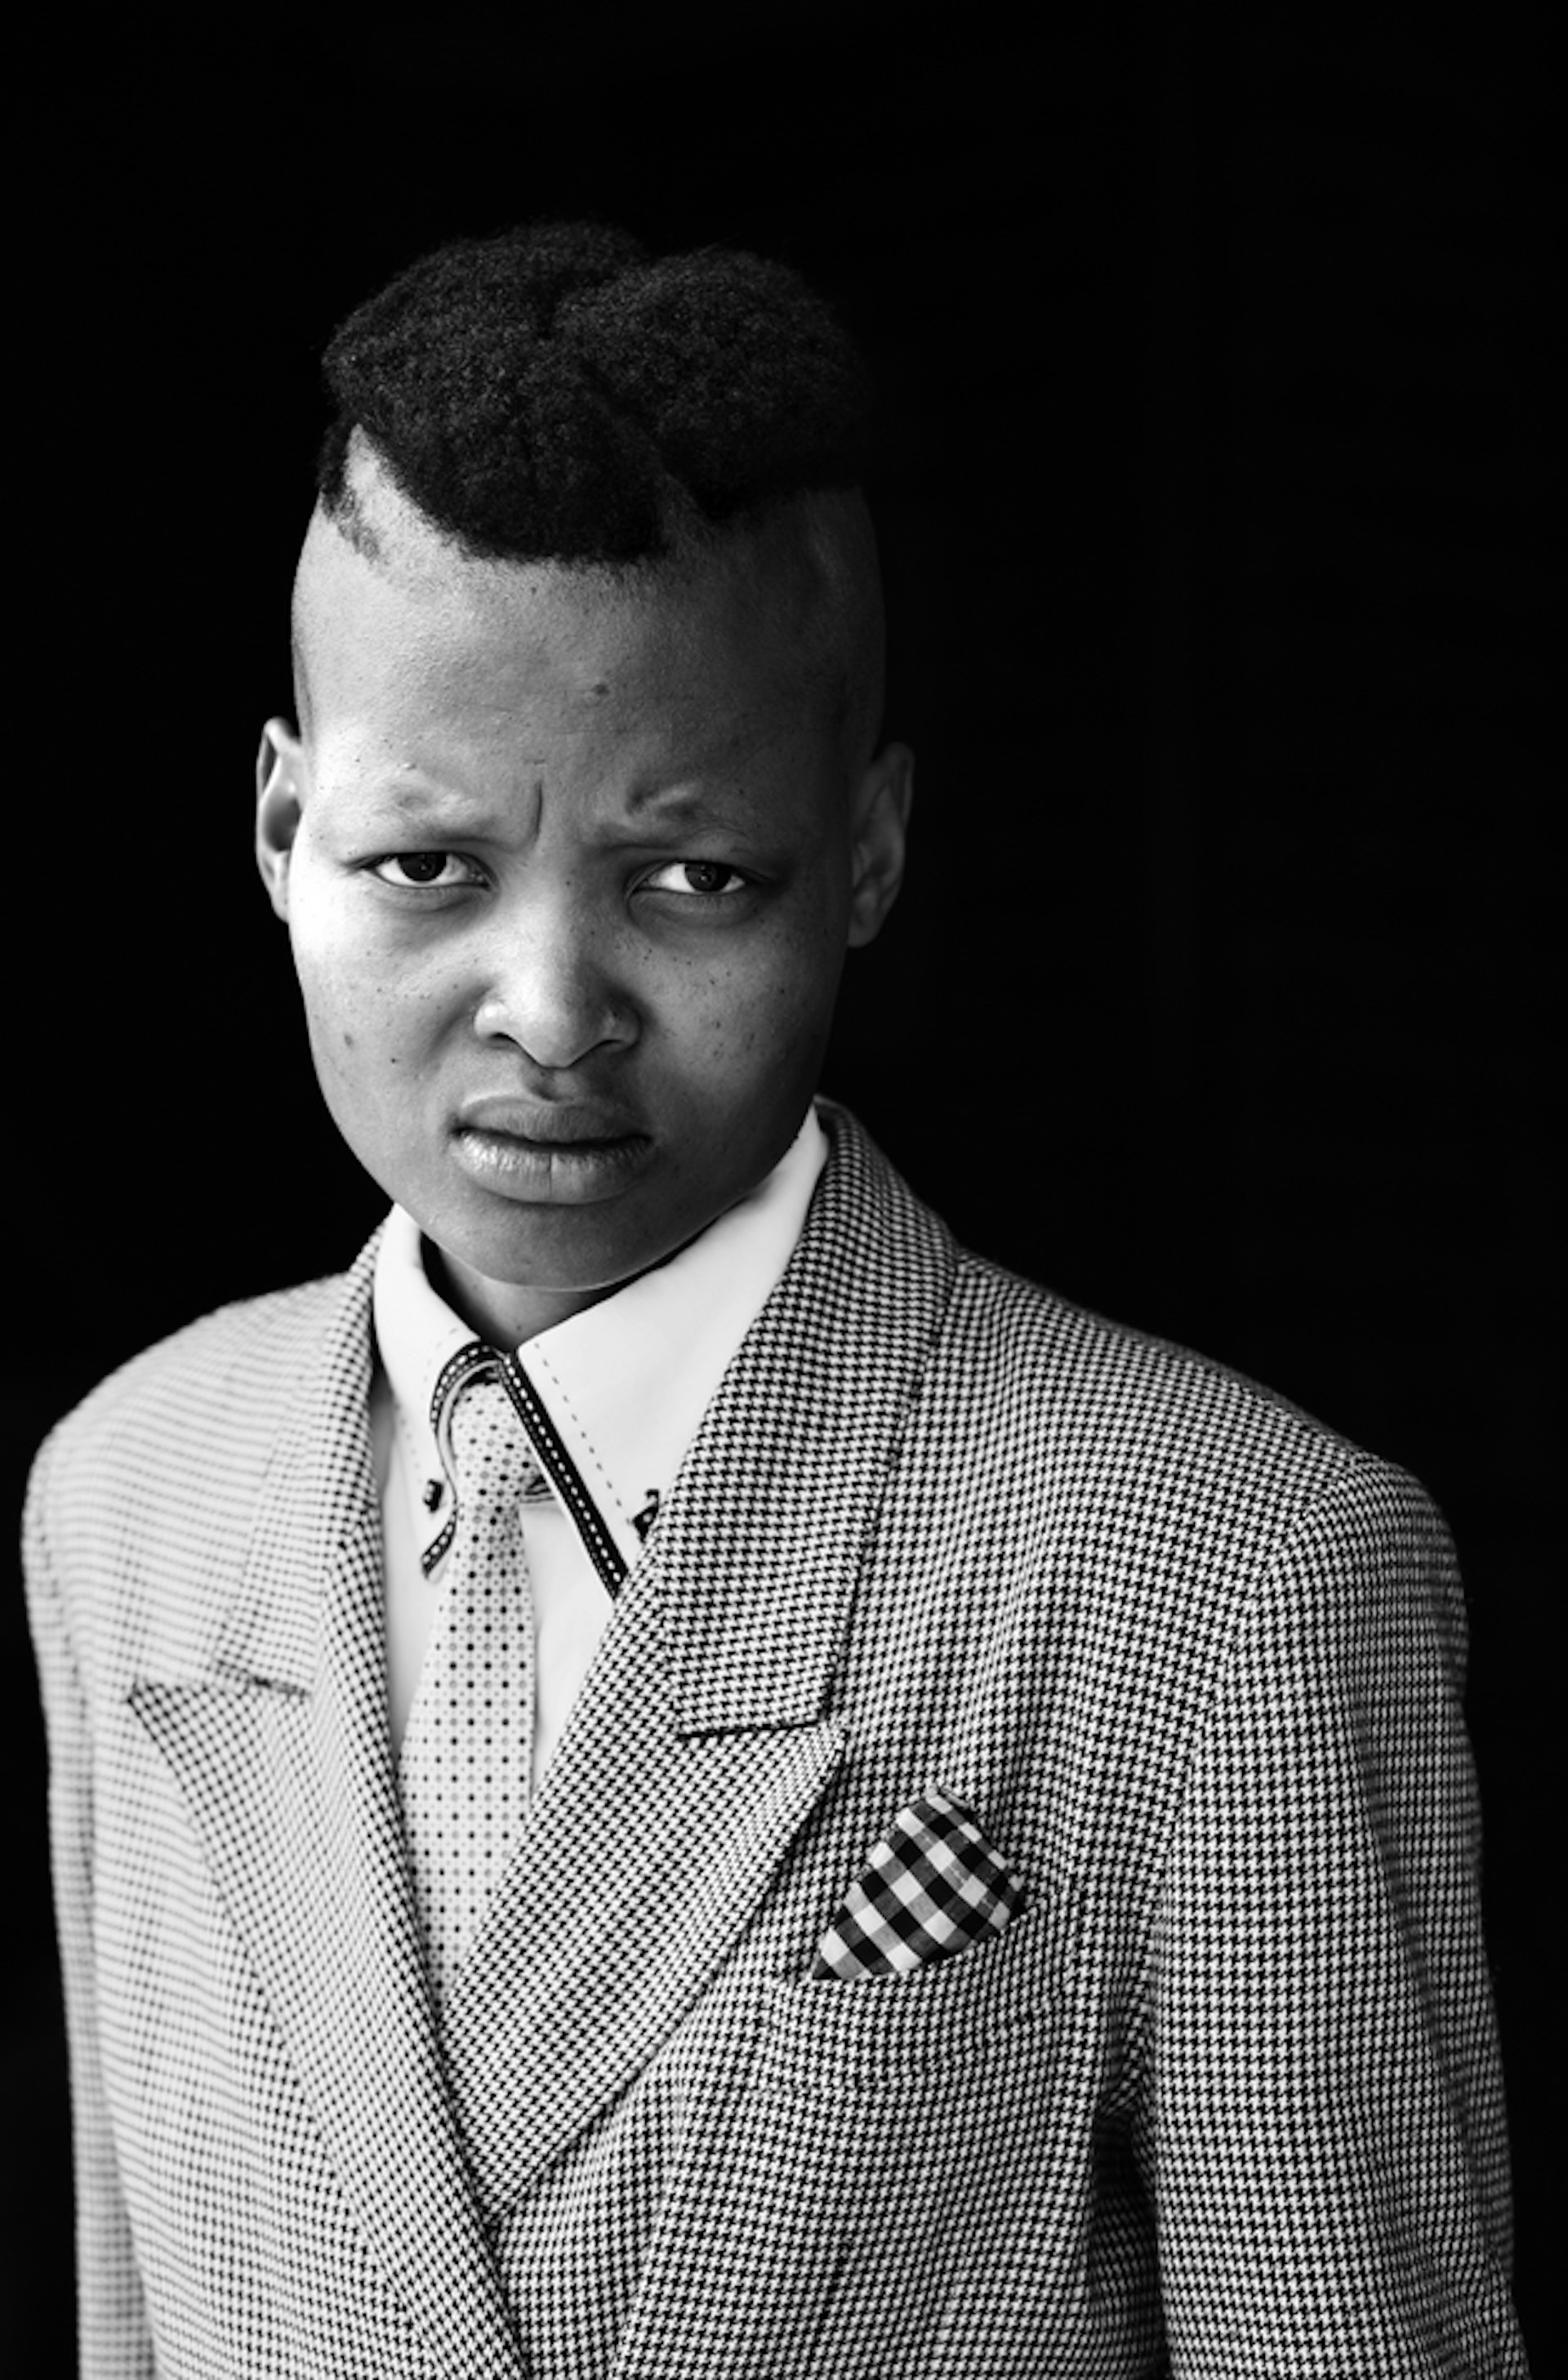 Zanele Muholi from the series Faces and Phases, 2013. Courtesy of Stevenson, Cape Town and Johannesburg.